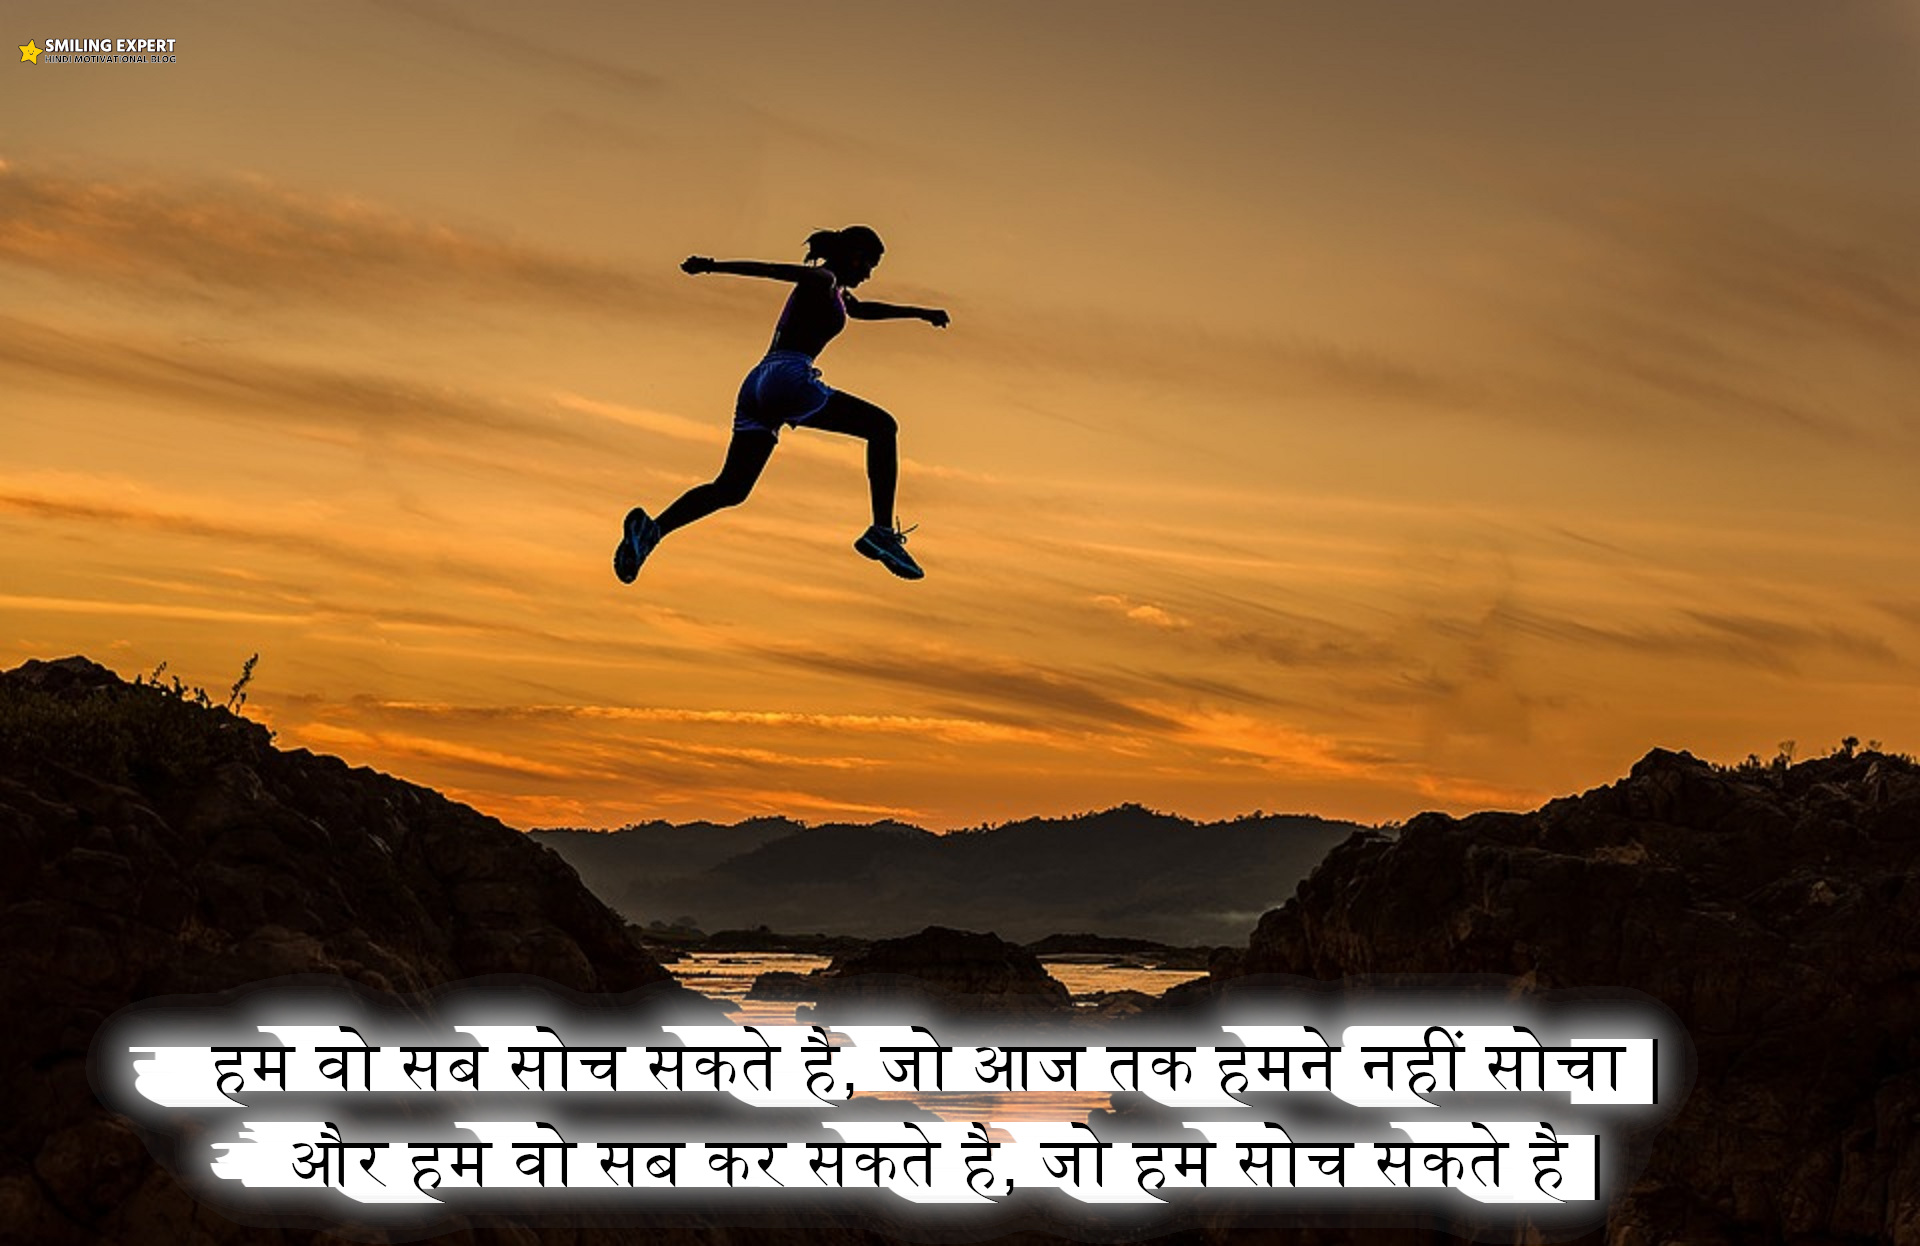 positive life quotes in hindi